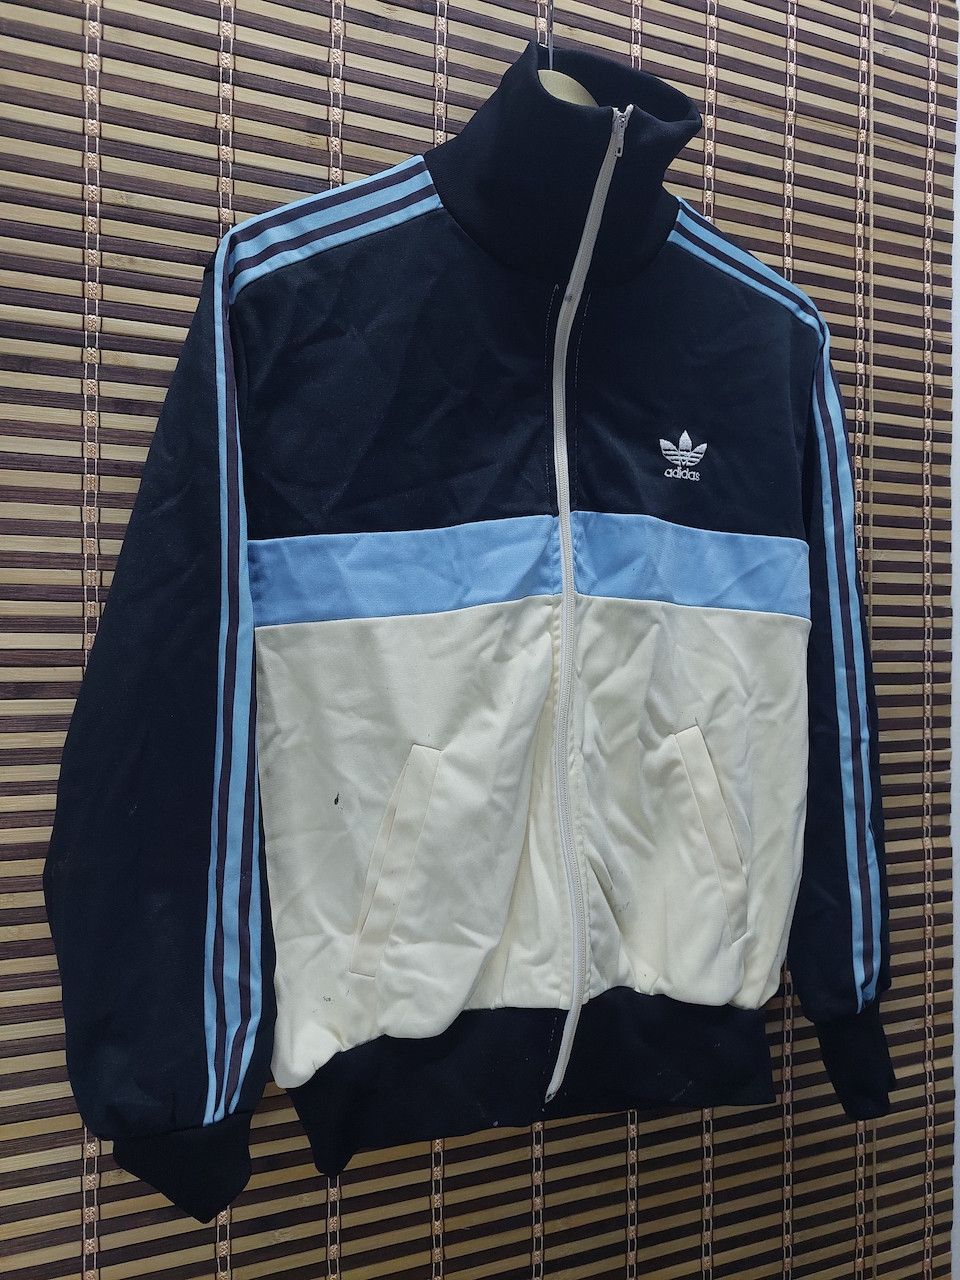 Super Vintage Adidas Tracktop Sweater Collector Items - 5